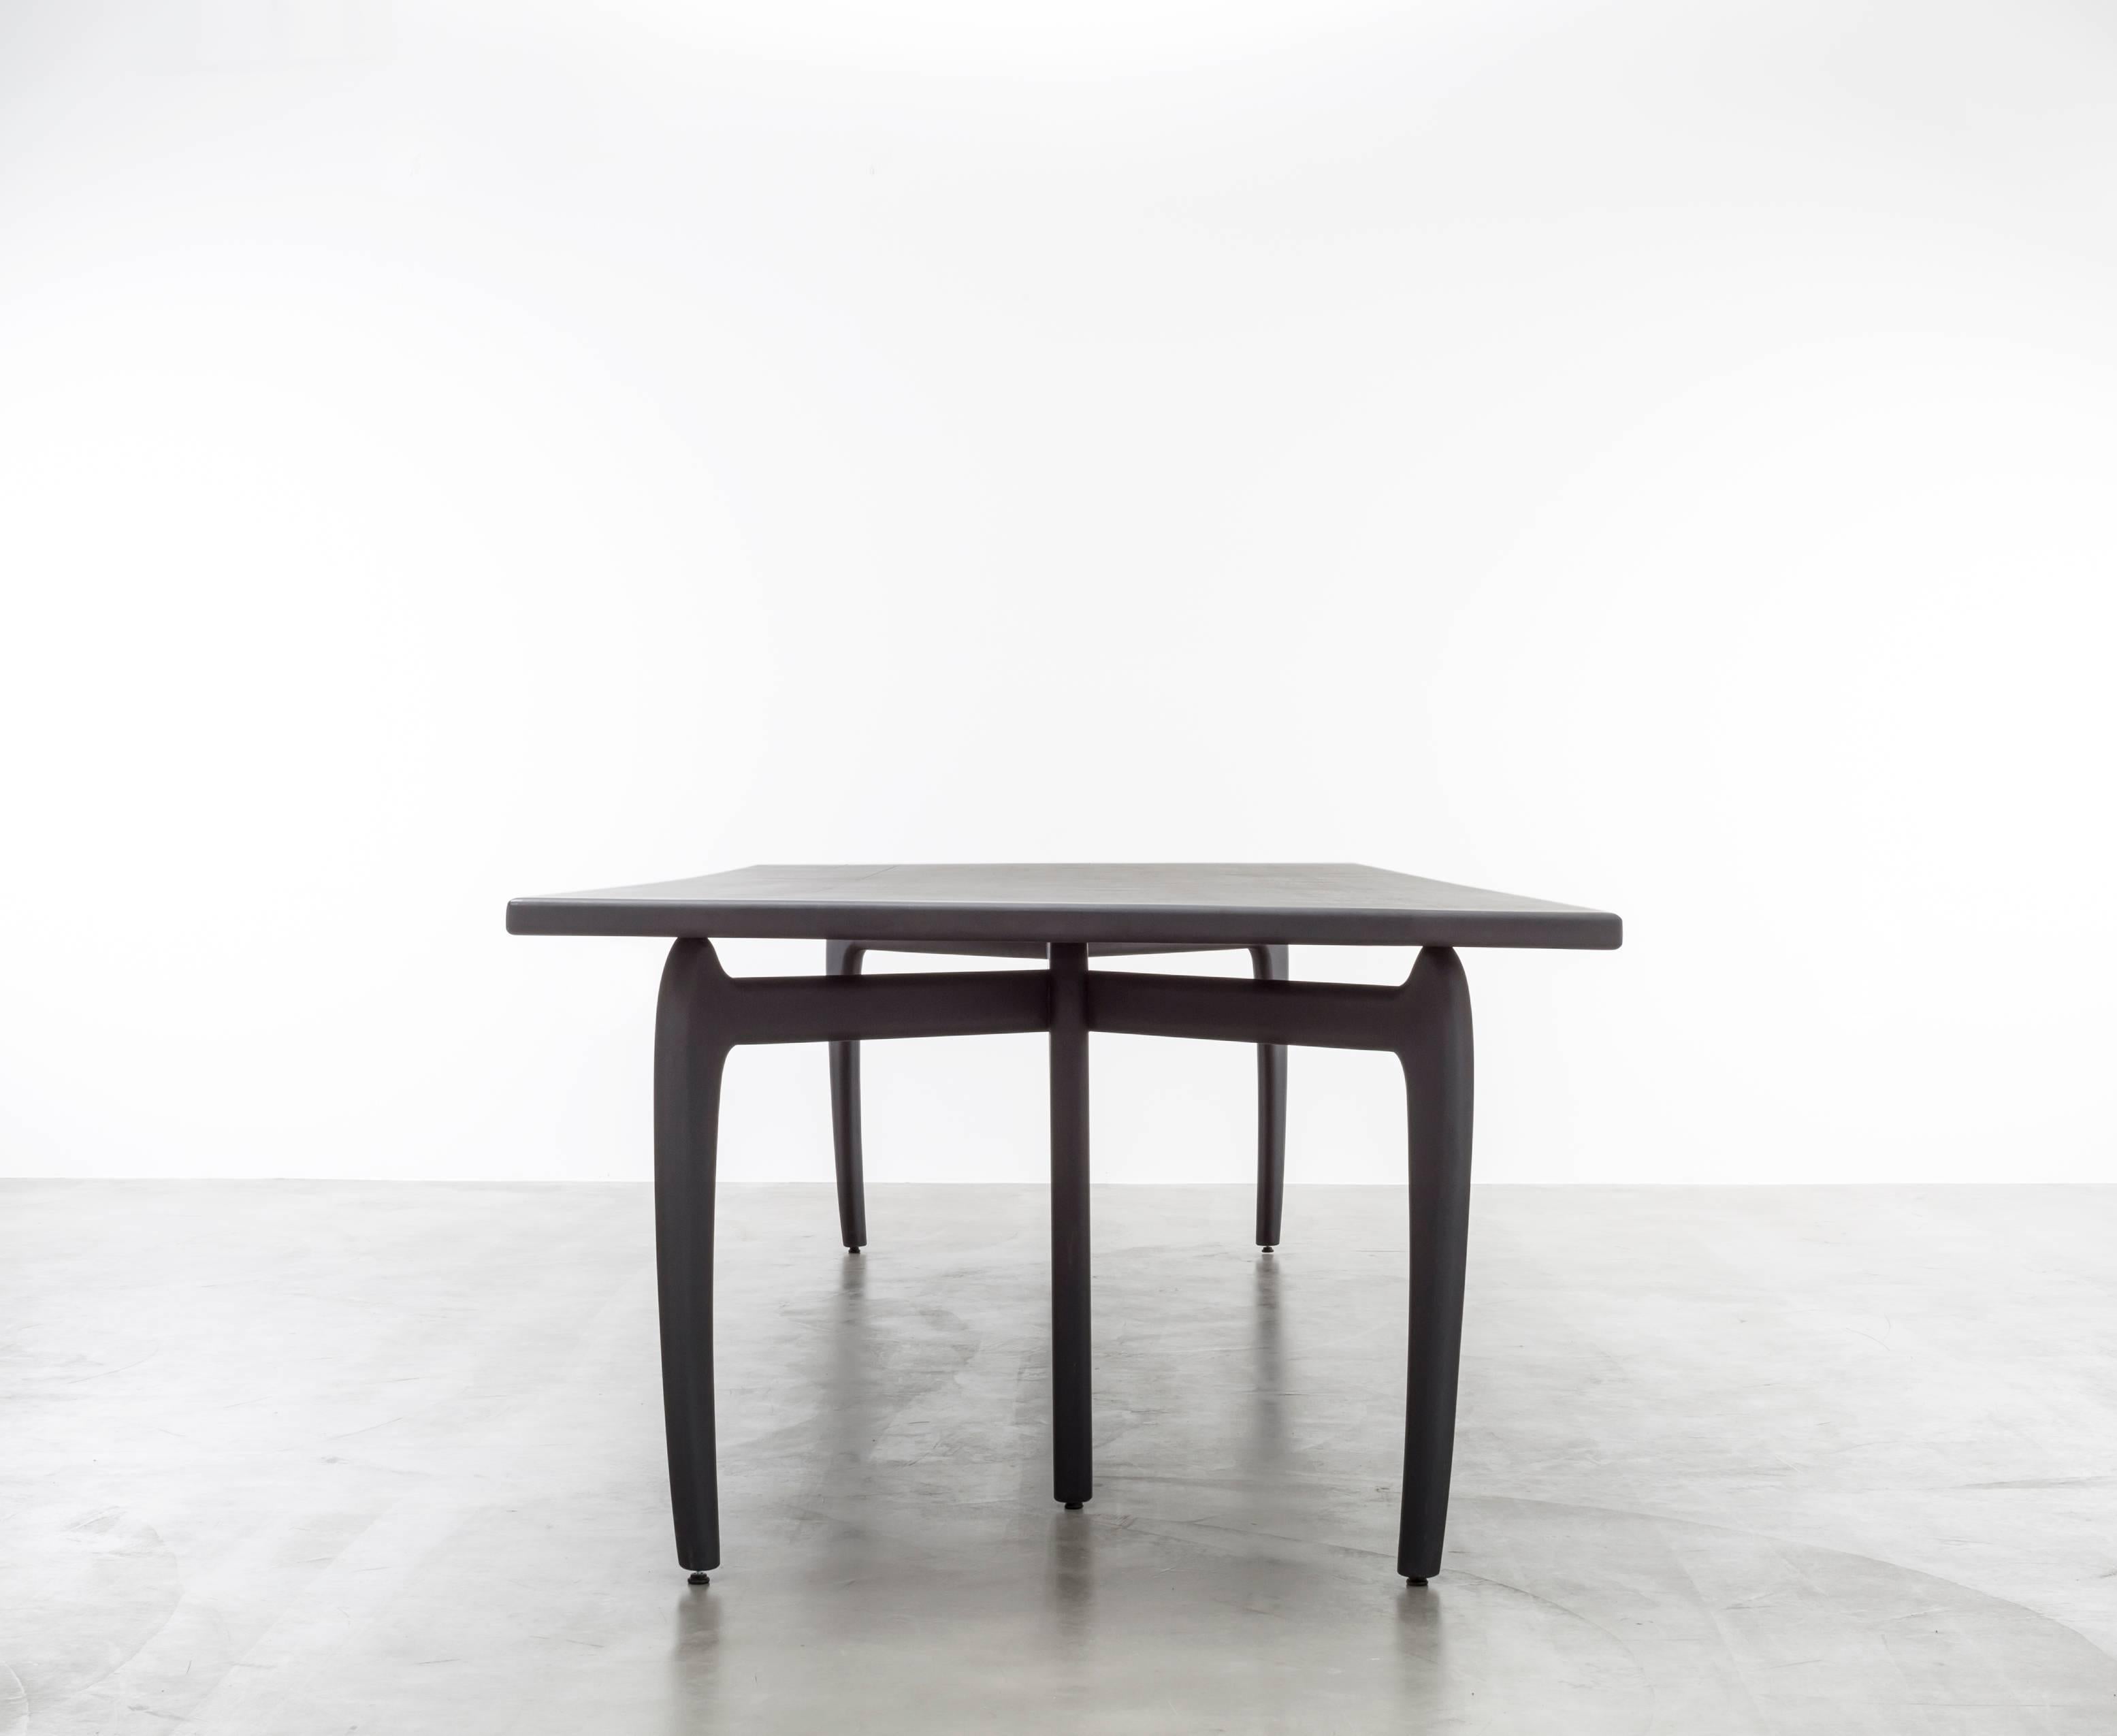 THEO DINING TABLE - Modern Hand-Carved Ebony Wood Dining Table

The Theo Dining Table is a beautiful and modern piece of furniture that combines a mid-century sensibility with contemporary design elements. It is made to order in California and fully